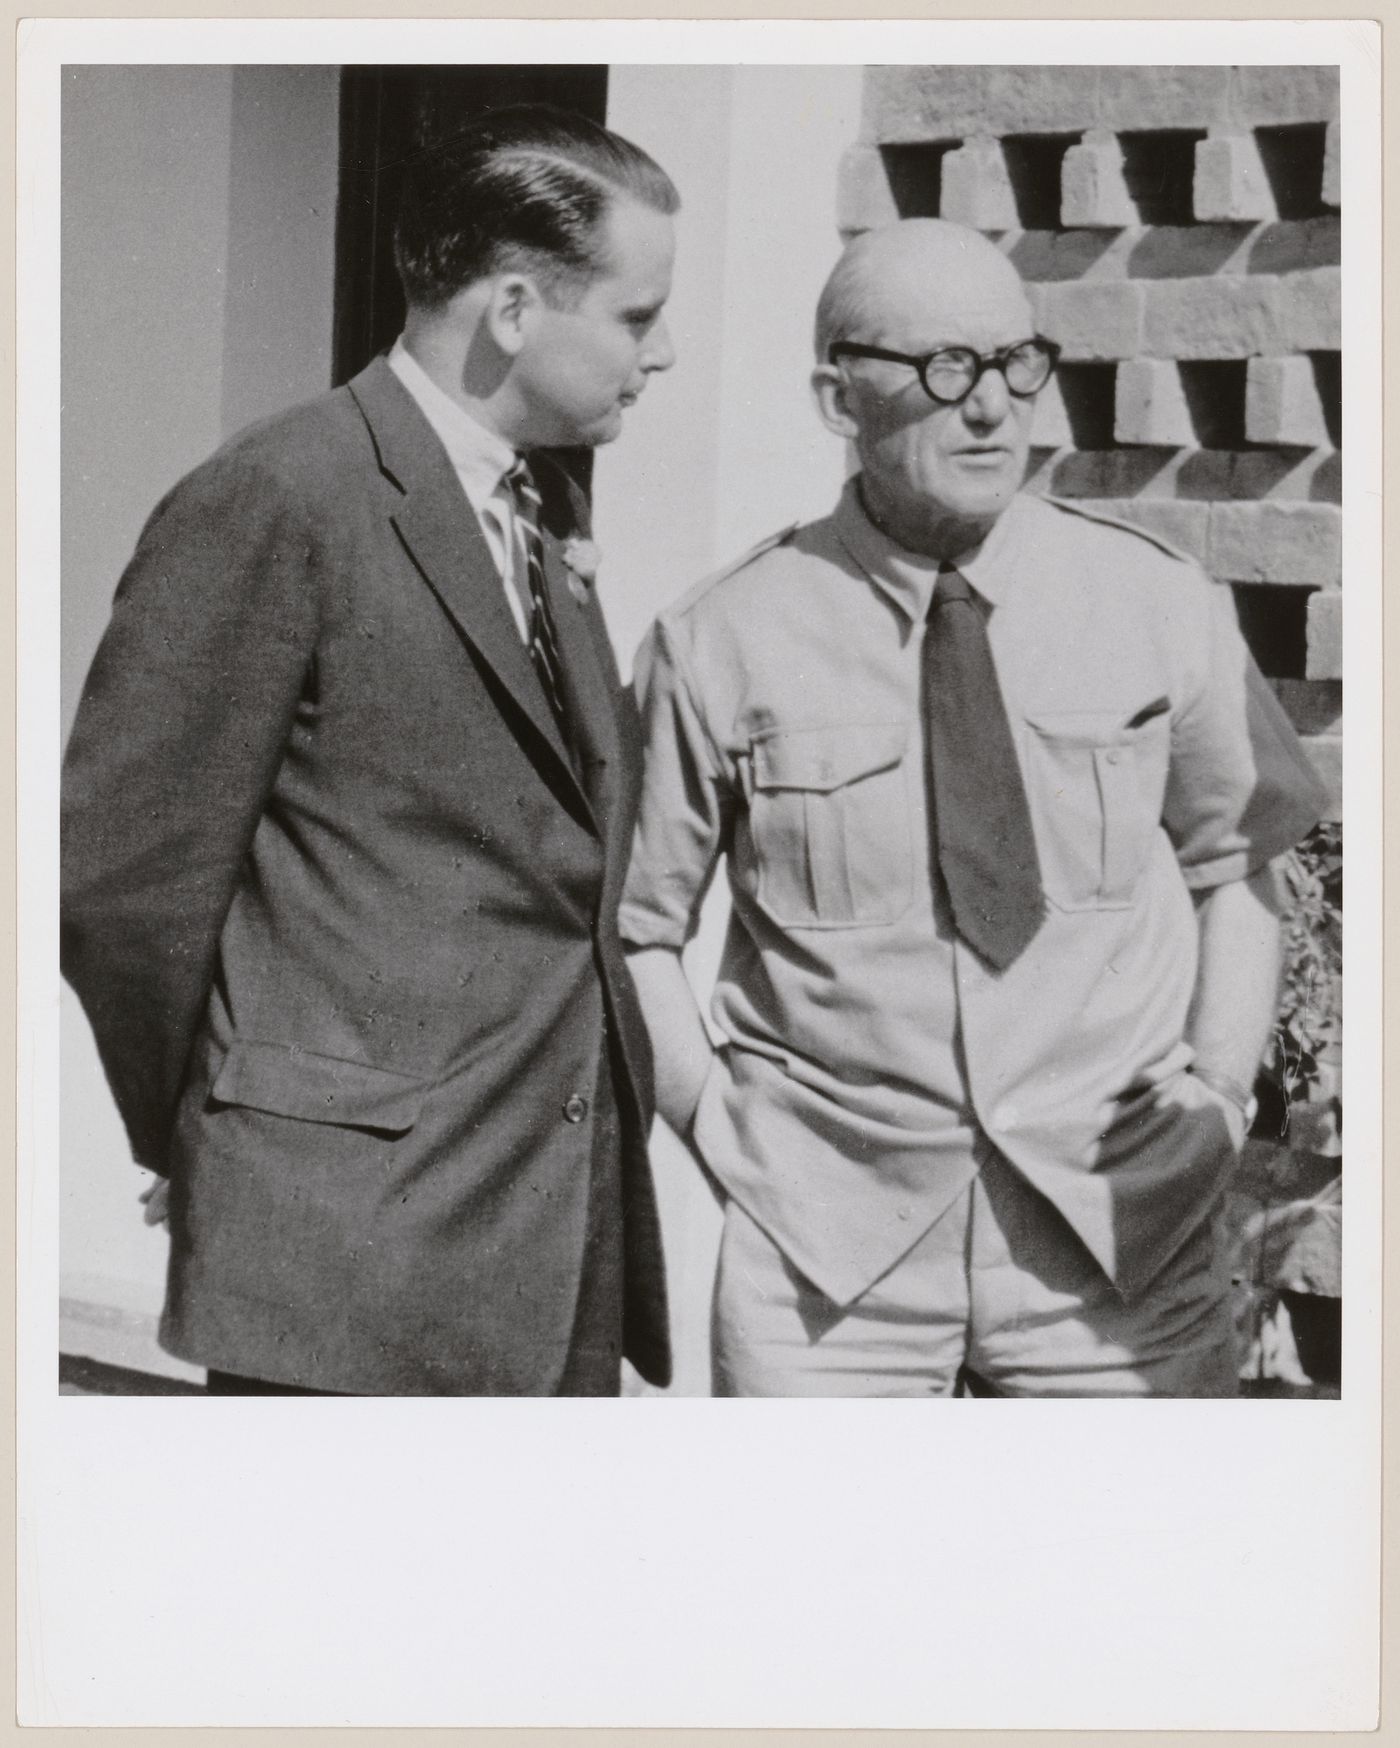 Parkin and Le Corbusier in India, probably in Chandigarh